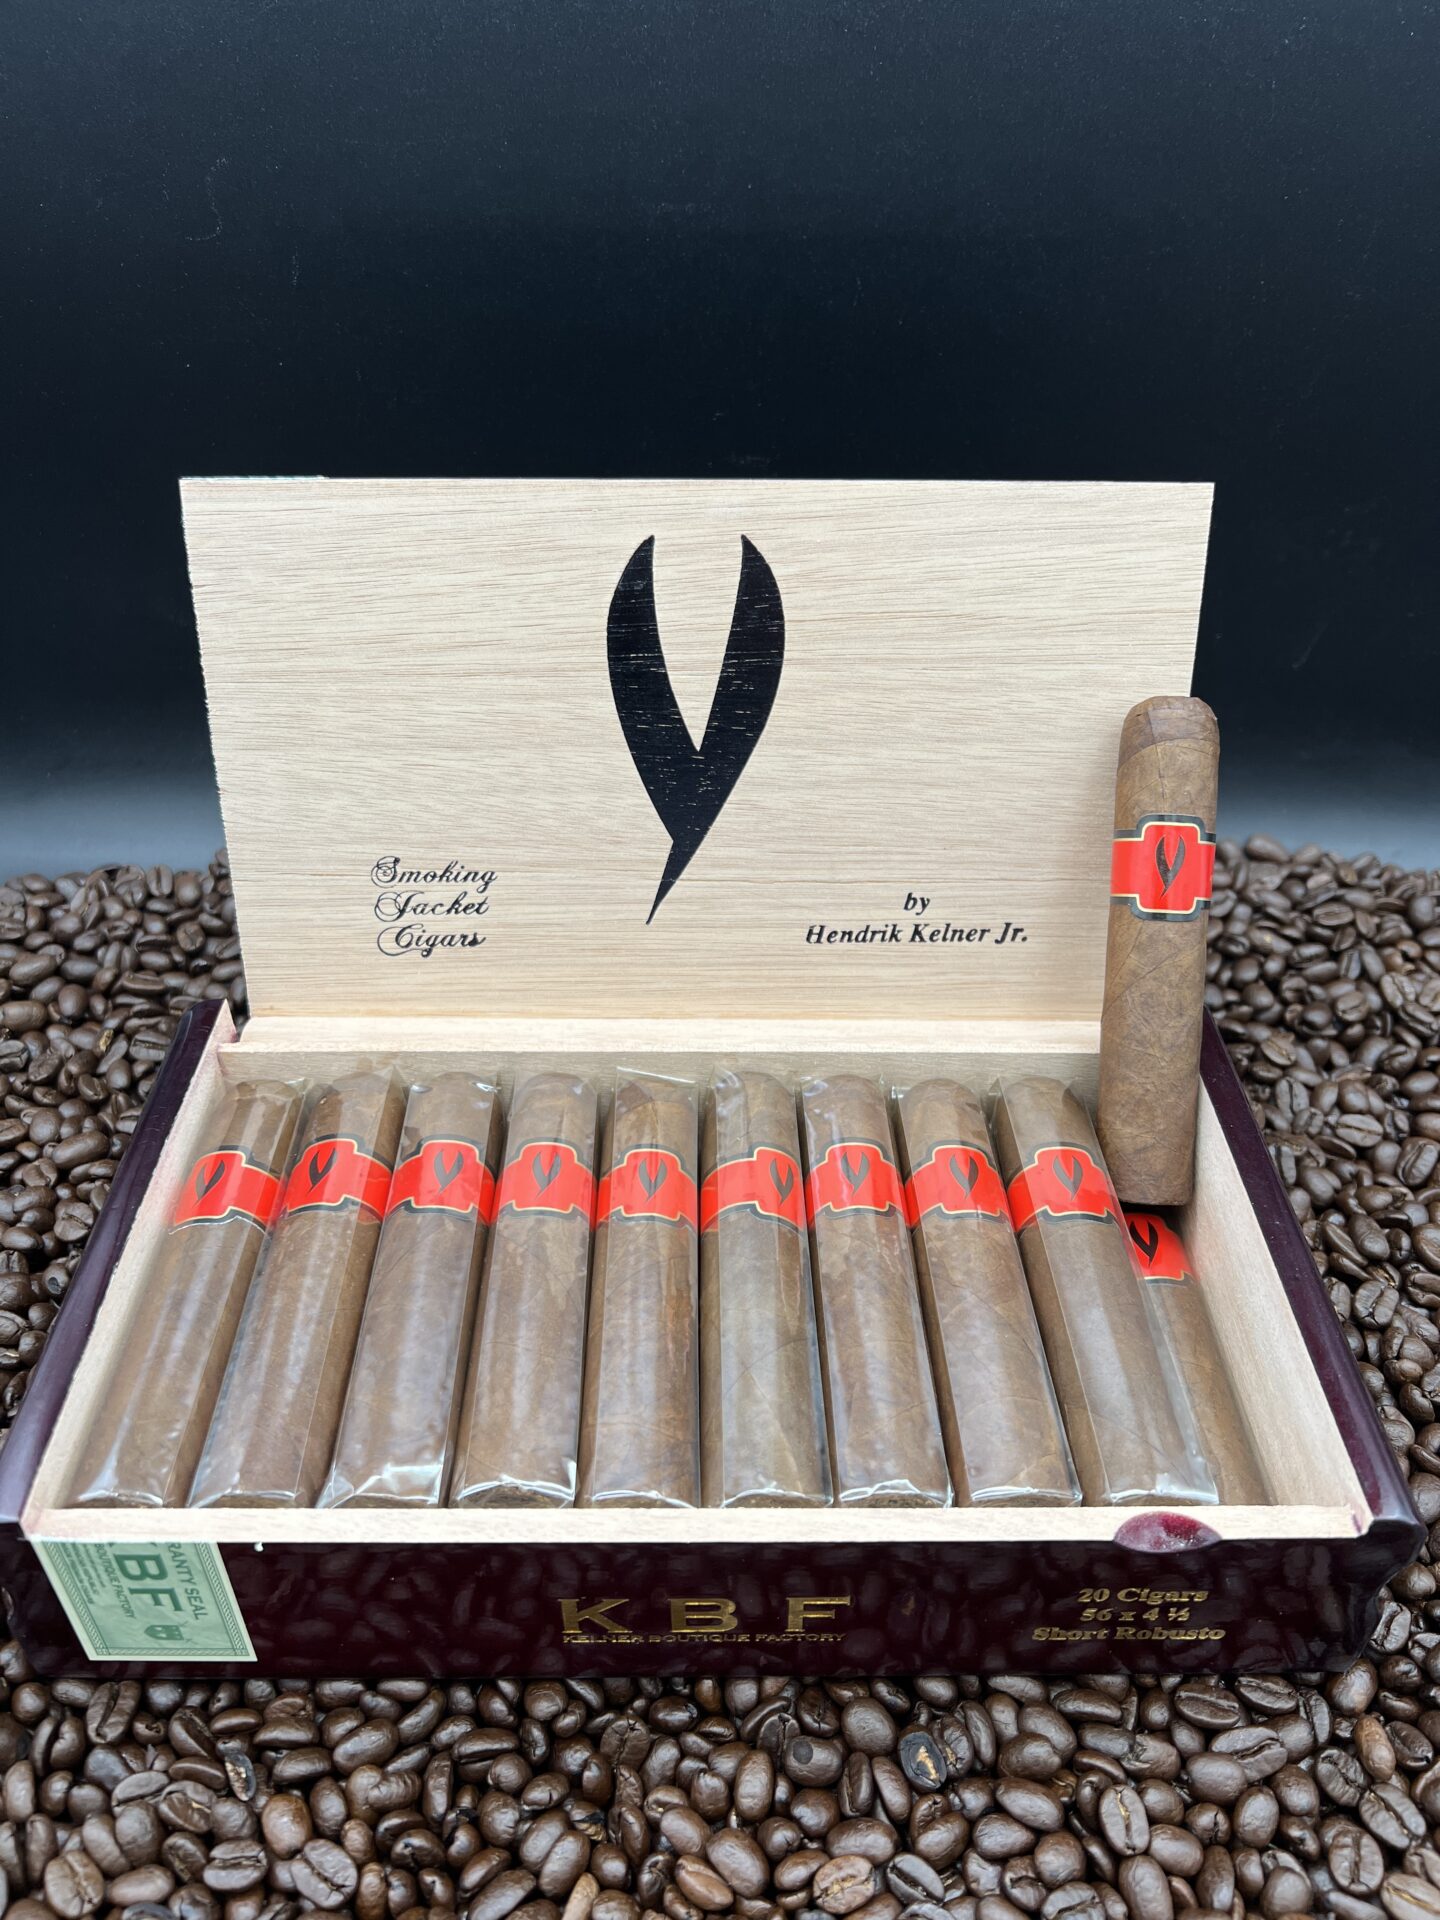 KBF - Smoking Jacket Classic Line Short Robusto cigars supplied by Sir Louis Cigars